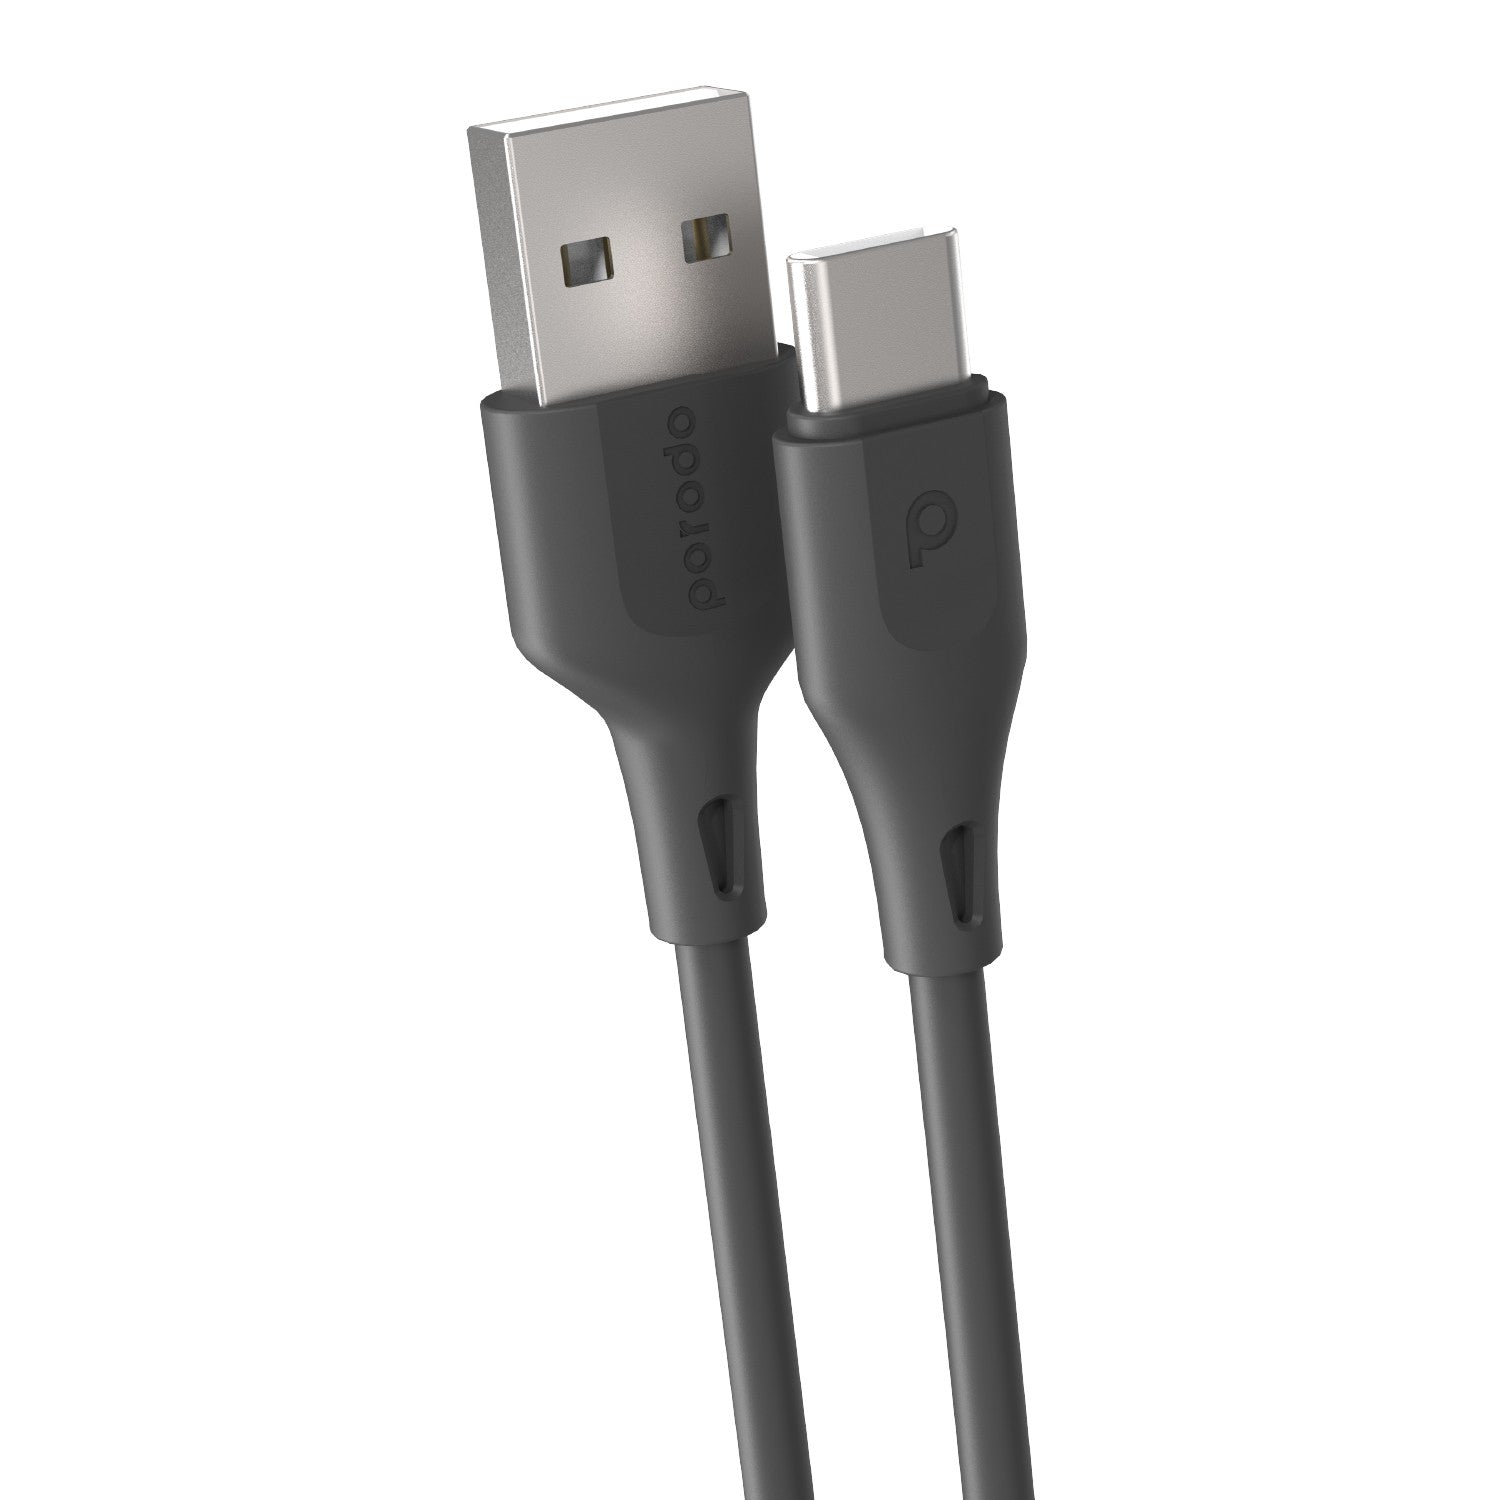 Porodo USB Cable Type-C Connector 3A Durable Fast Charge and Data Cable (1.2m/4ft) - Black - DXOU